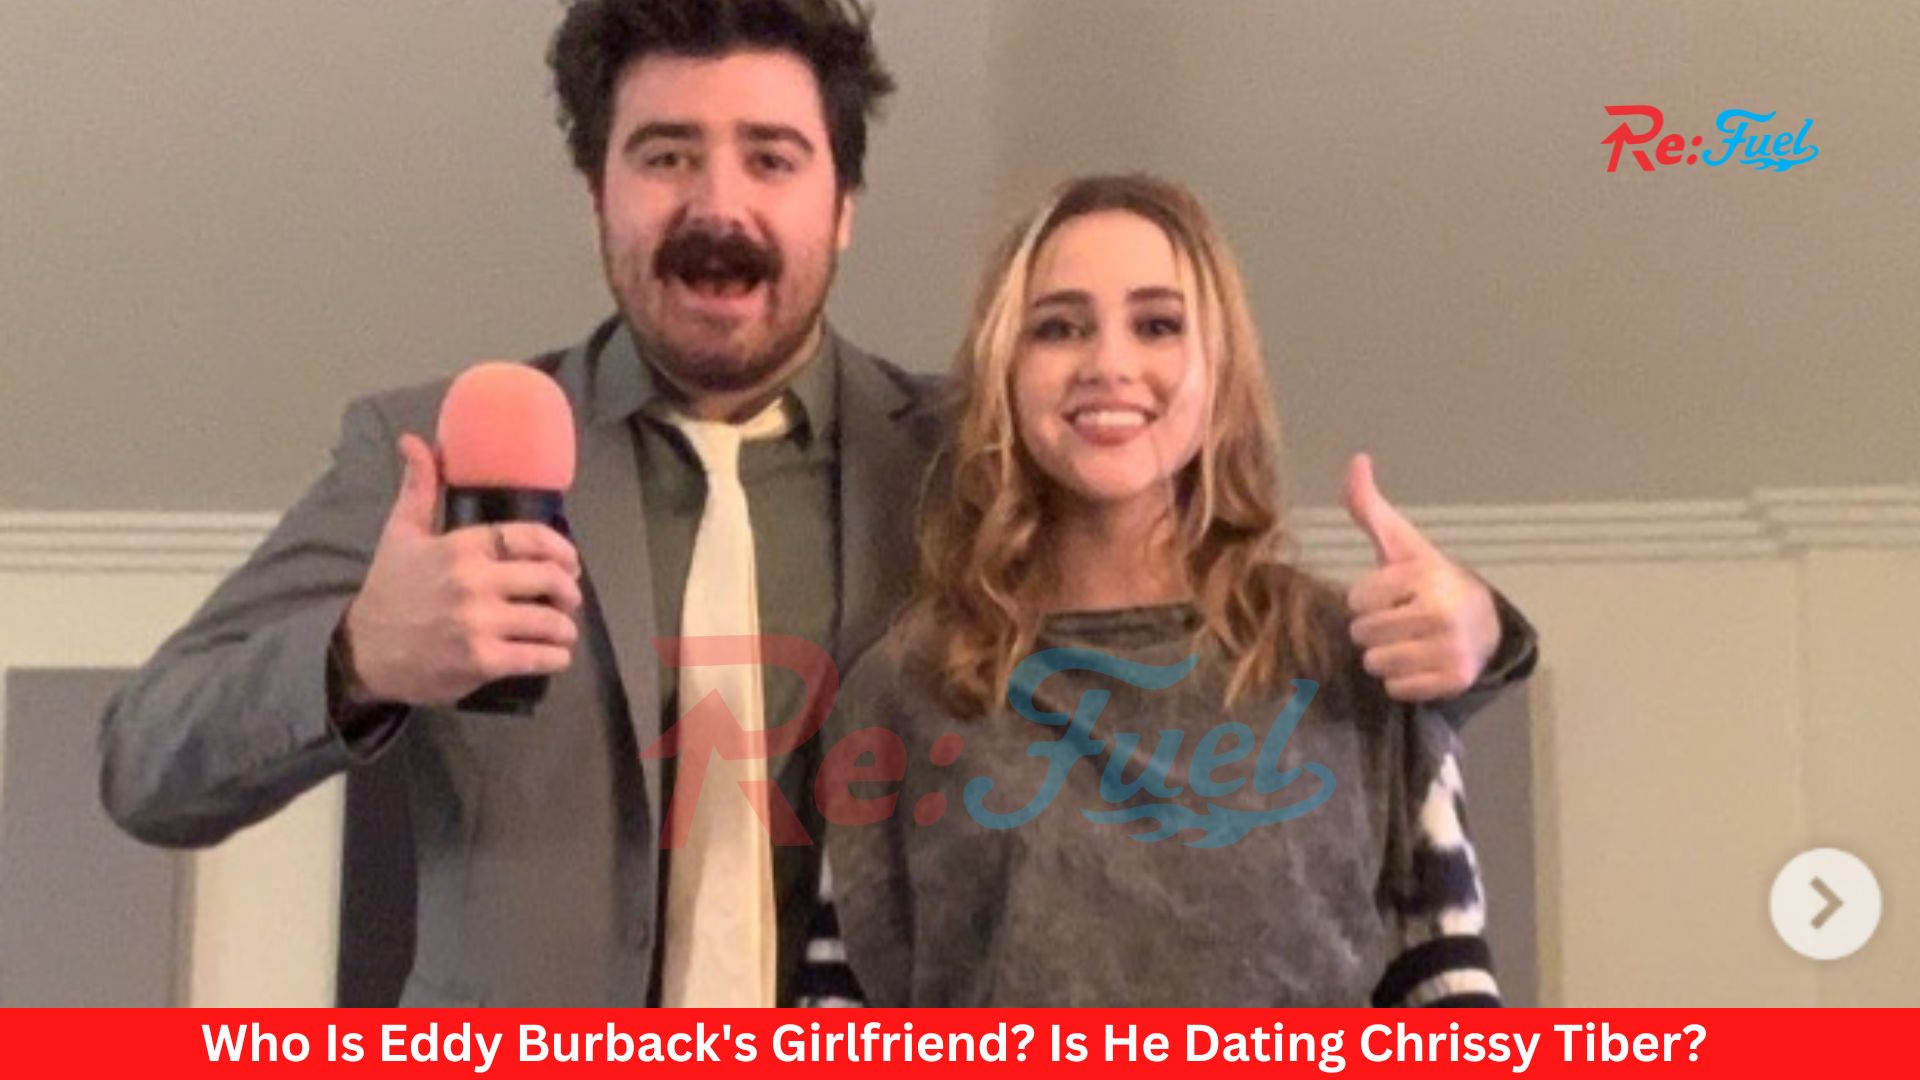 Who Is Eddy Burback's Girlfriend? Is He Dating Chrissy Tiber?